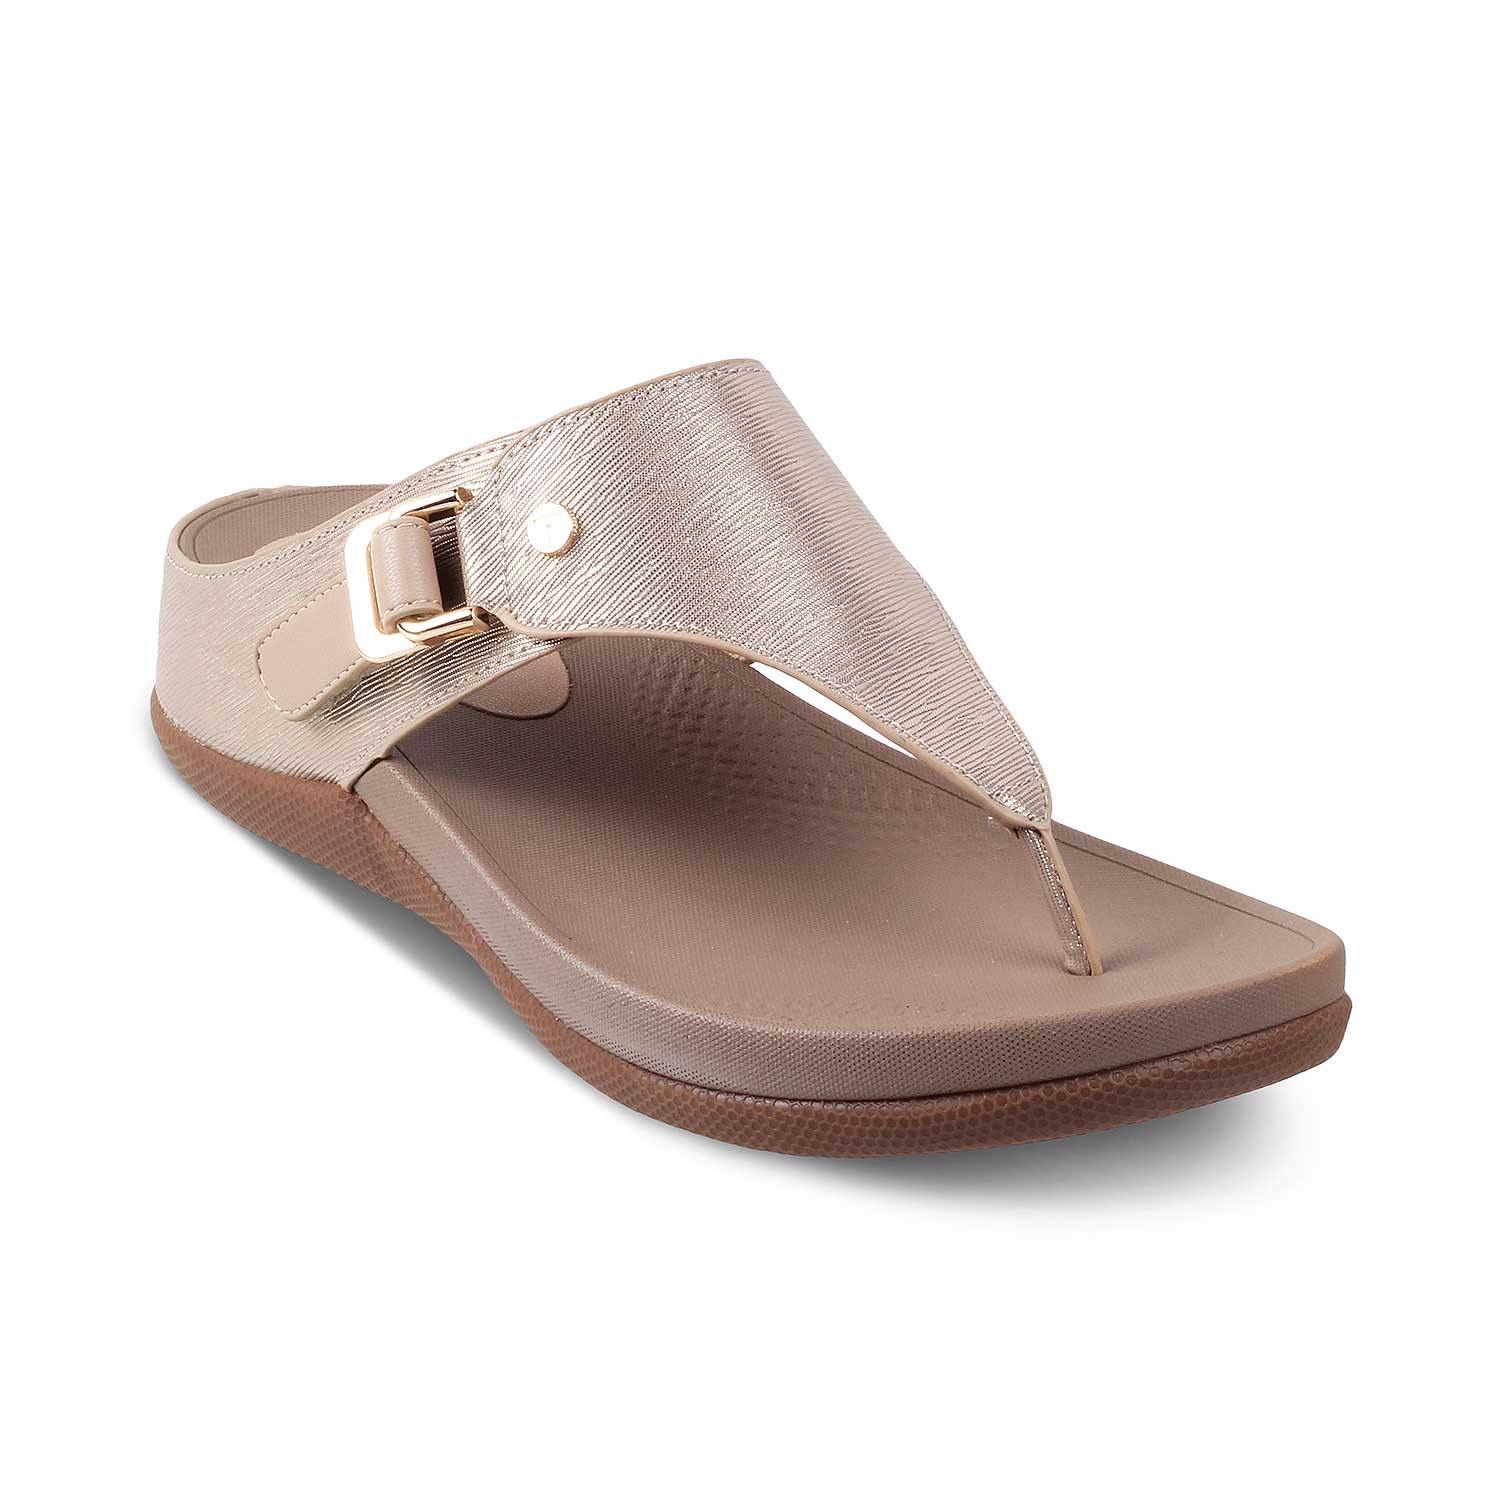 The Aaryed Gold Women's Casual Wedge Sandals Tresmode - Tresmode